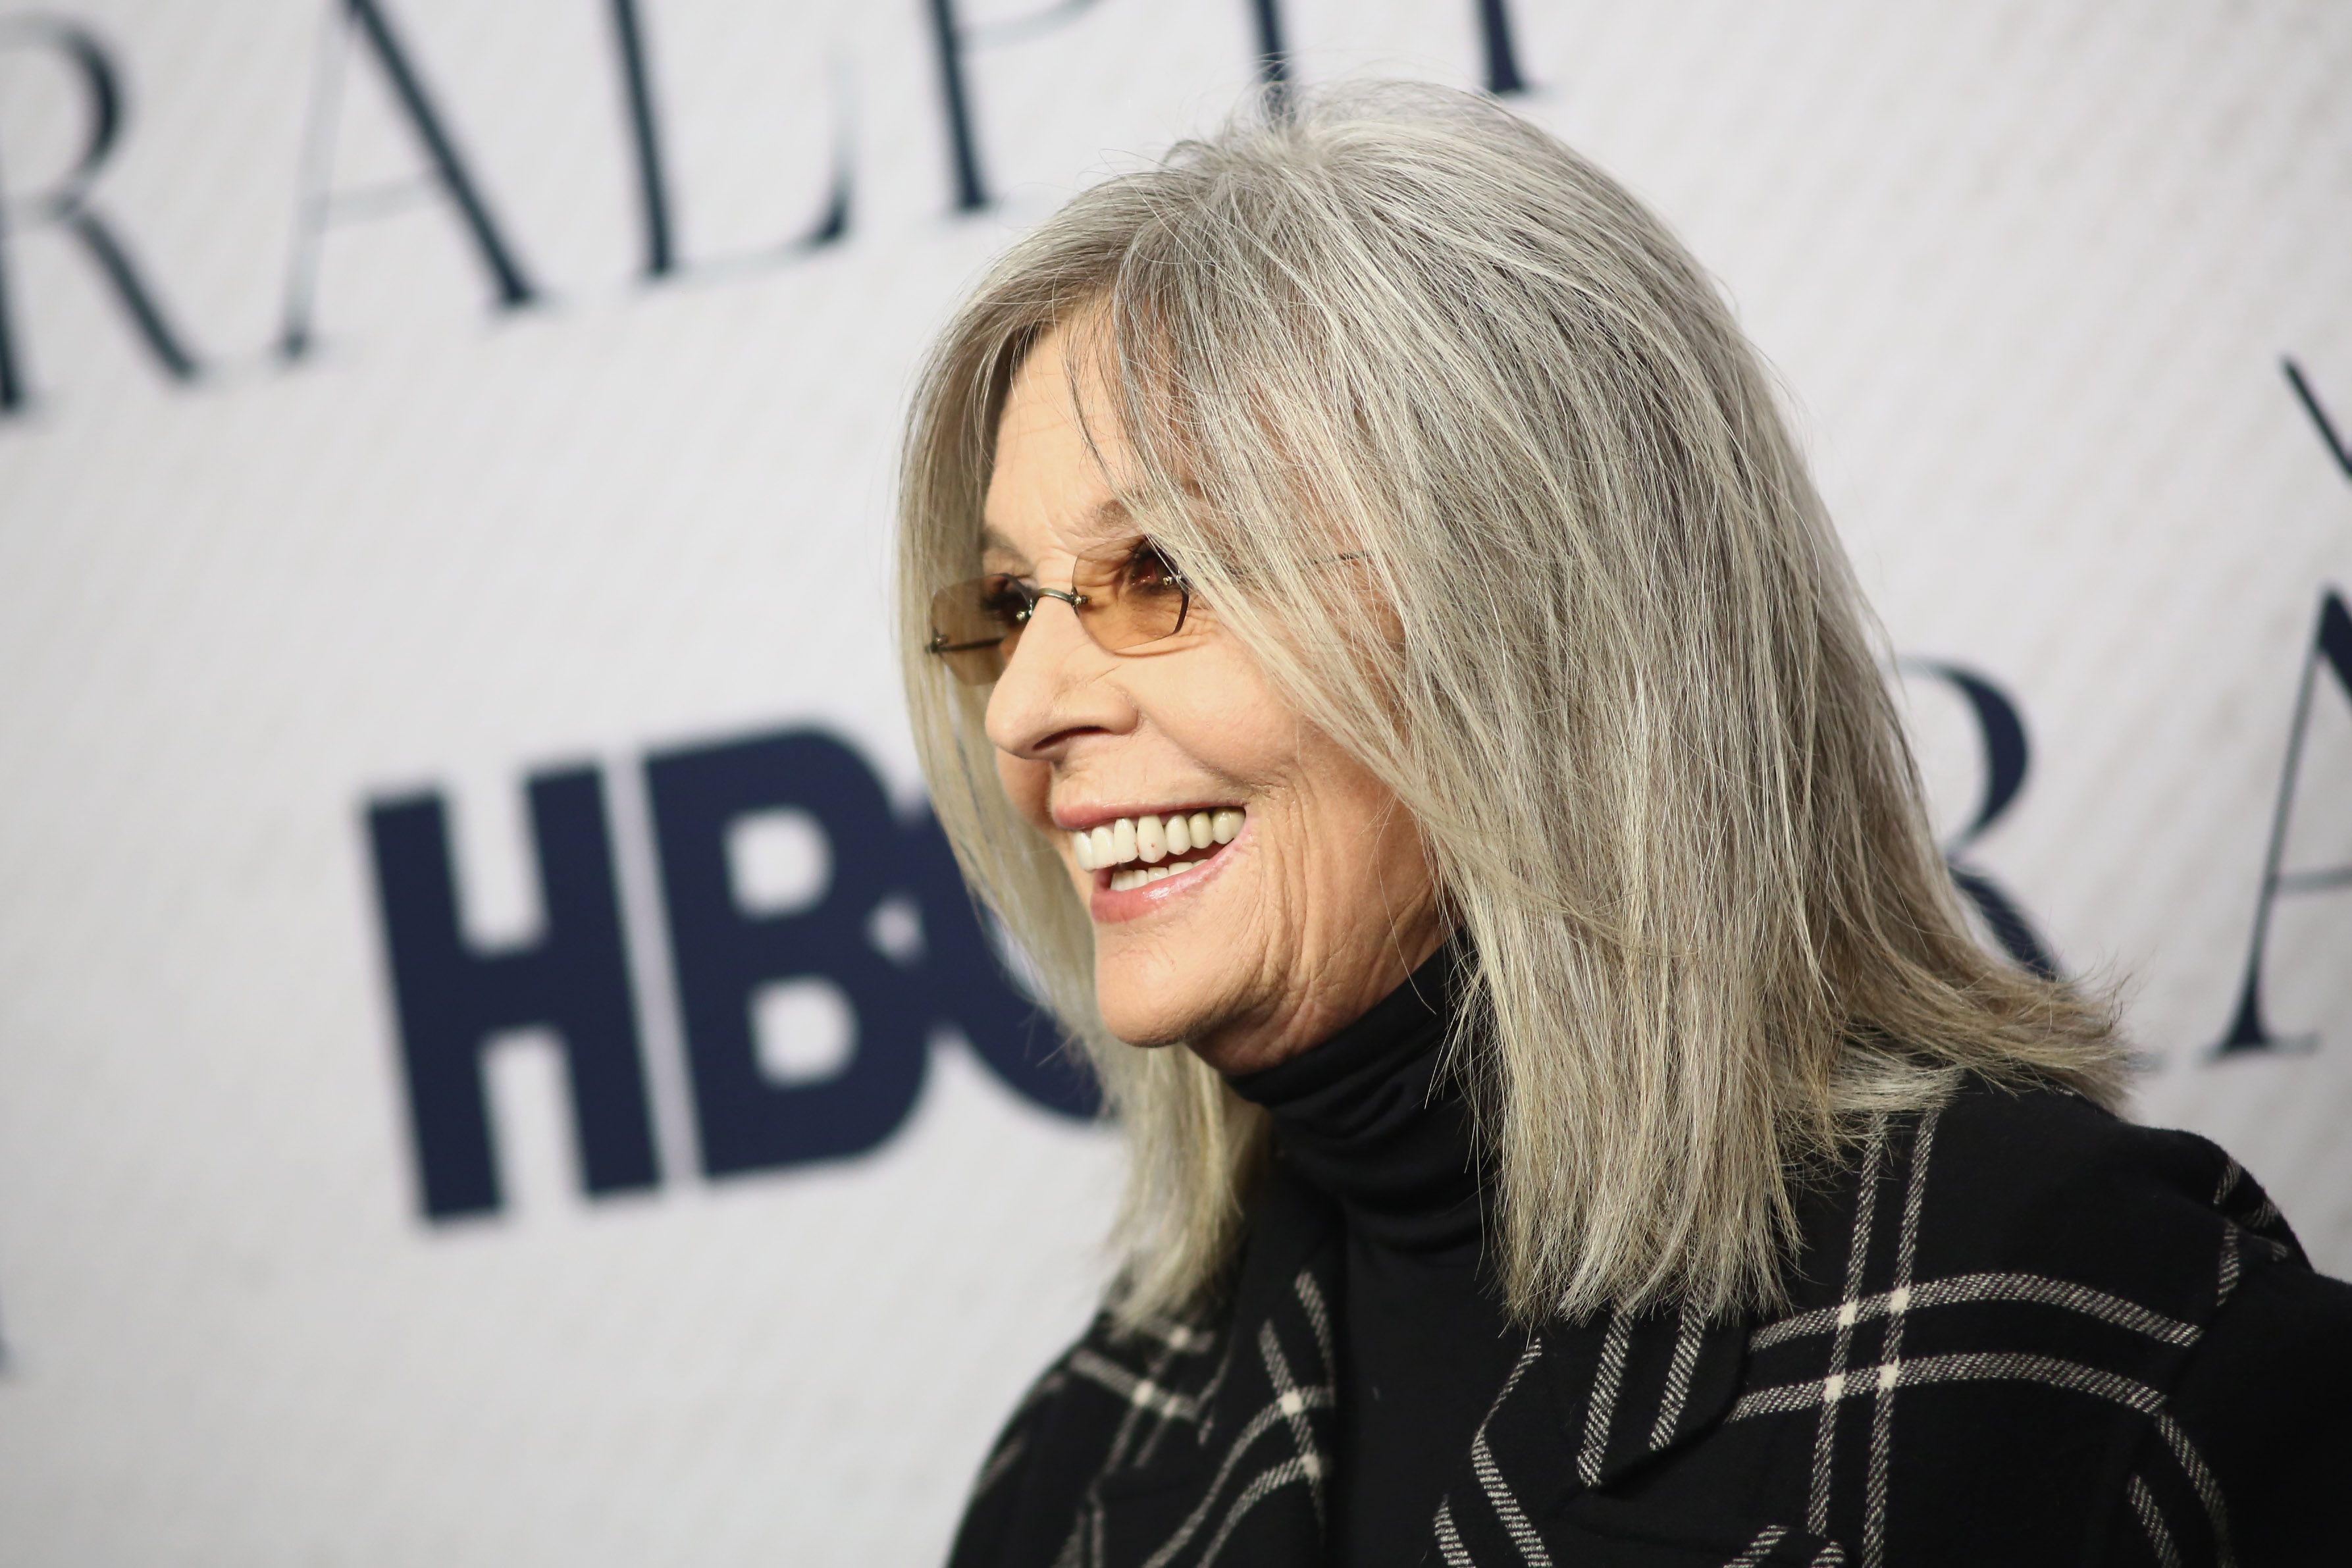 15 Celebrities With Gray Hair - Women Who Transitioned To Gray